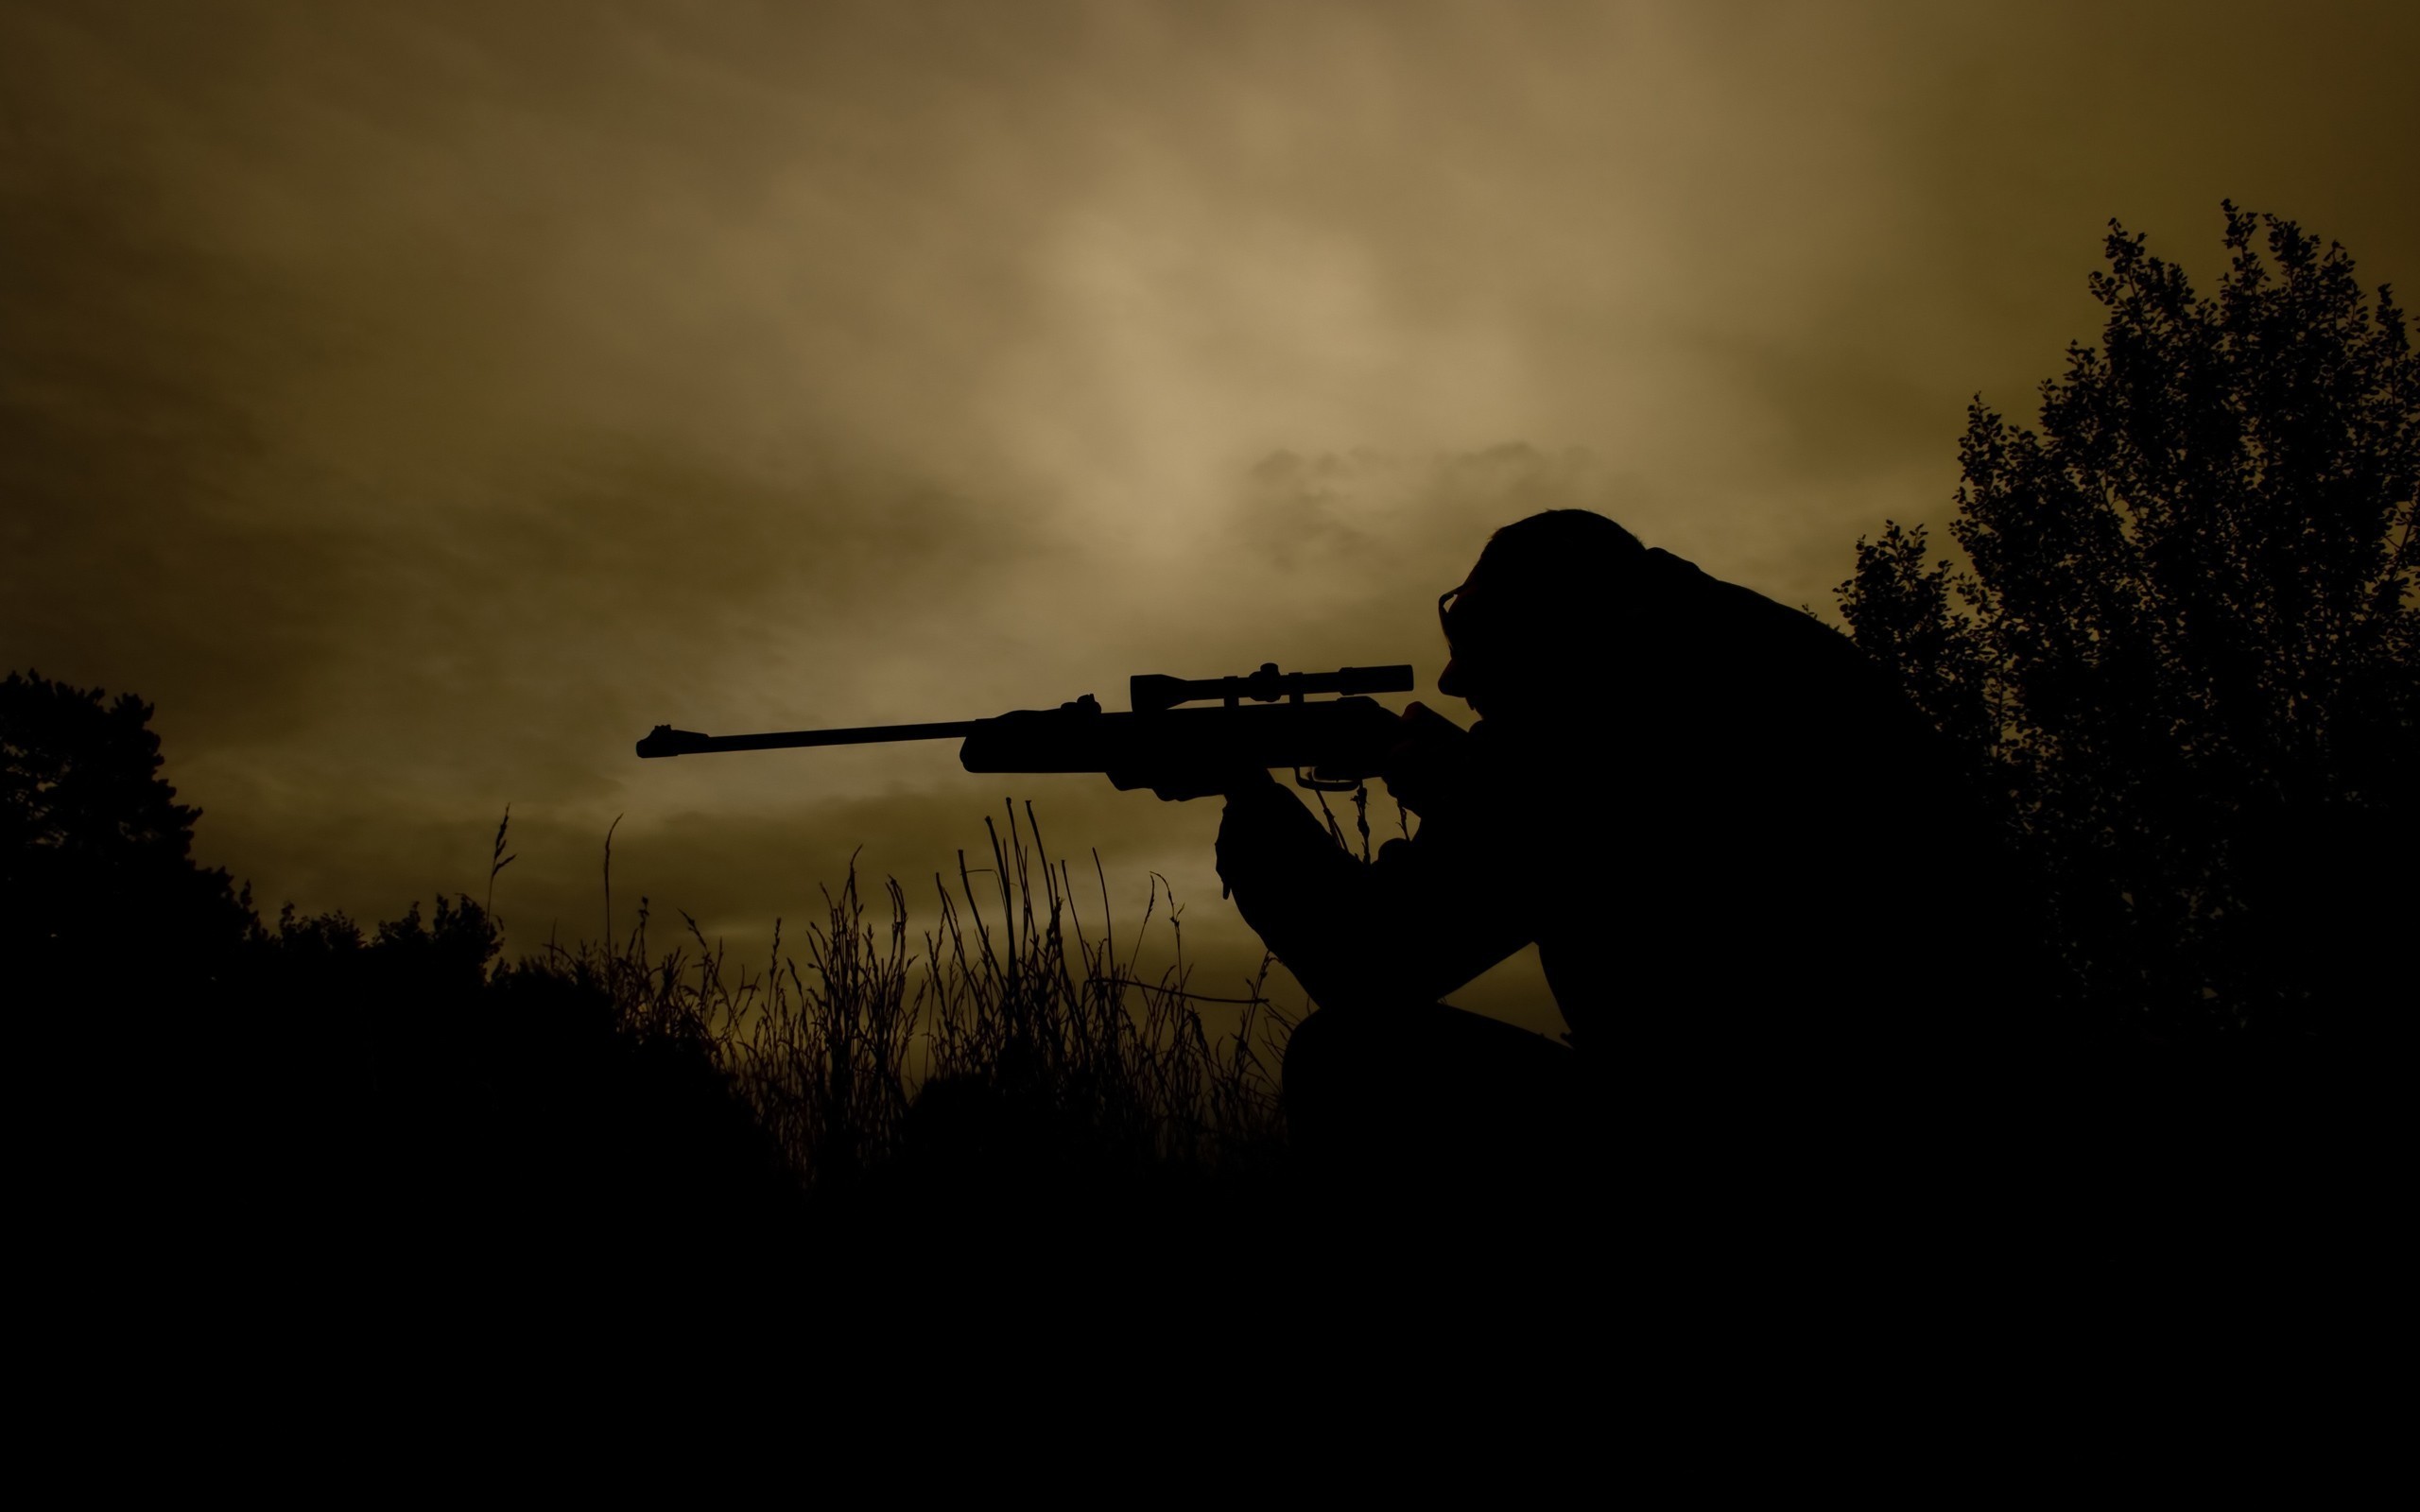 Desktop Wallpaper Sniper Rifle Snipers Soldiers Silhouettes Army